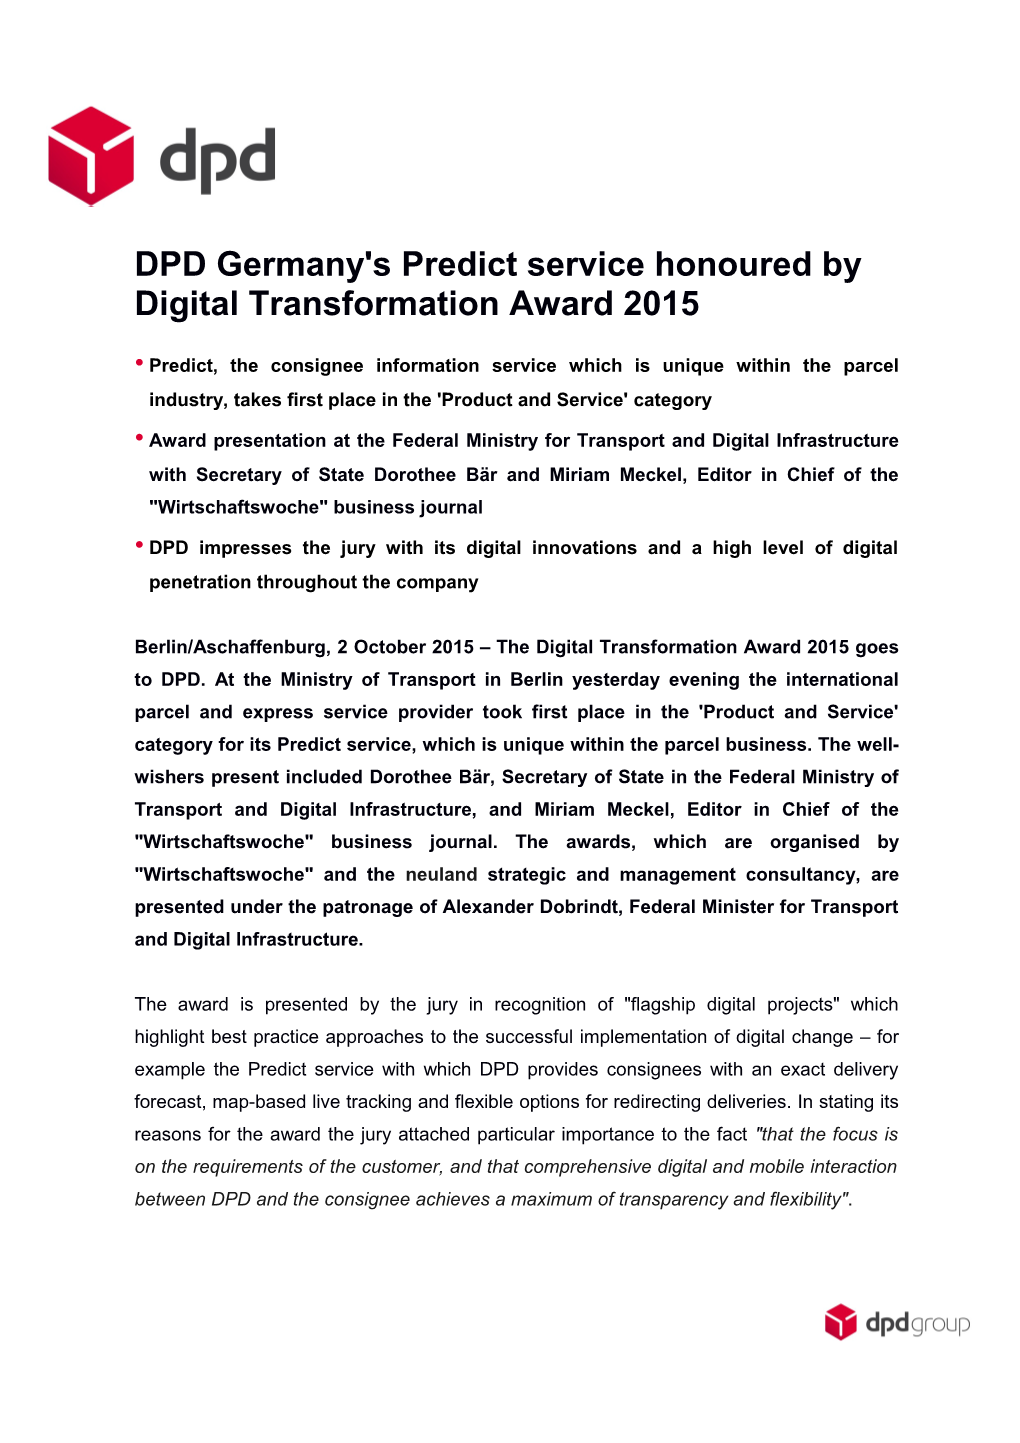 DPD Germany's Predict Service Honoured by Digital Transformation Award 2015